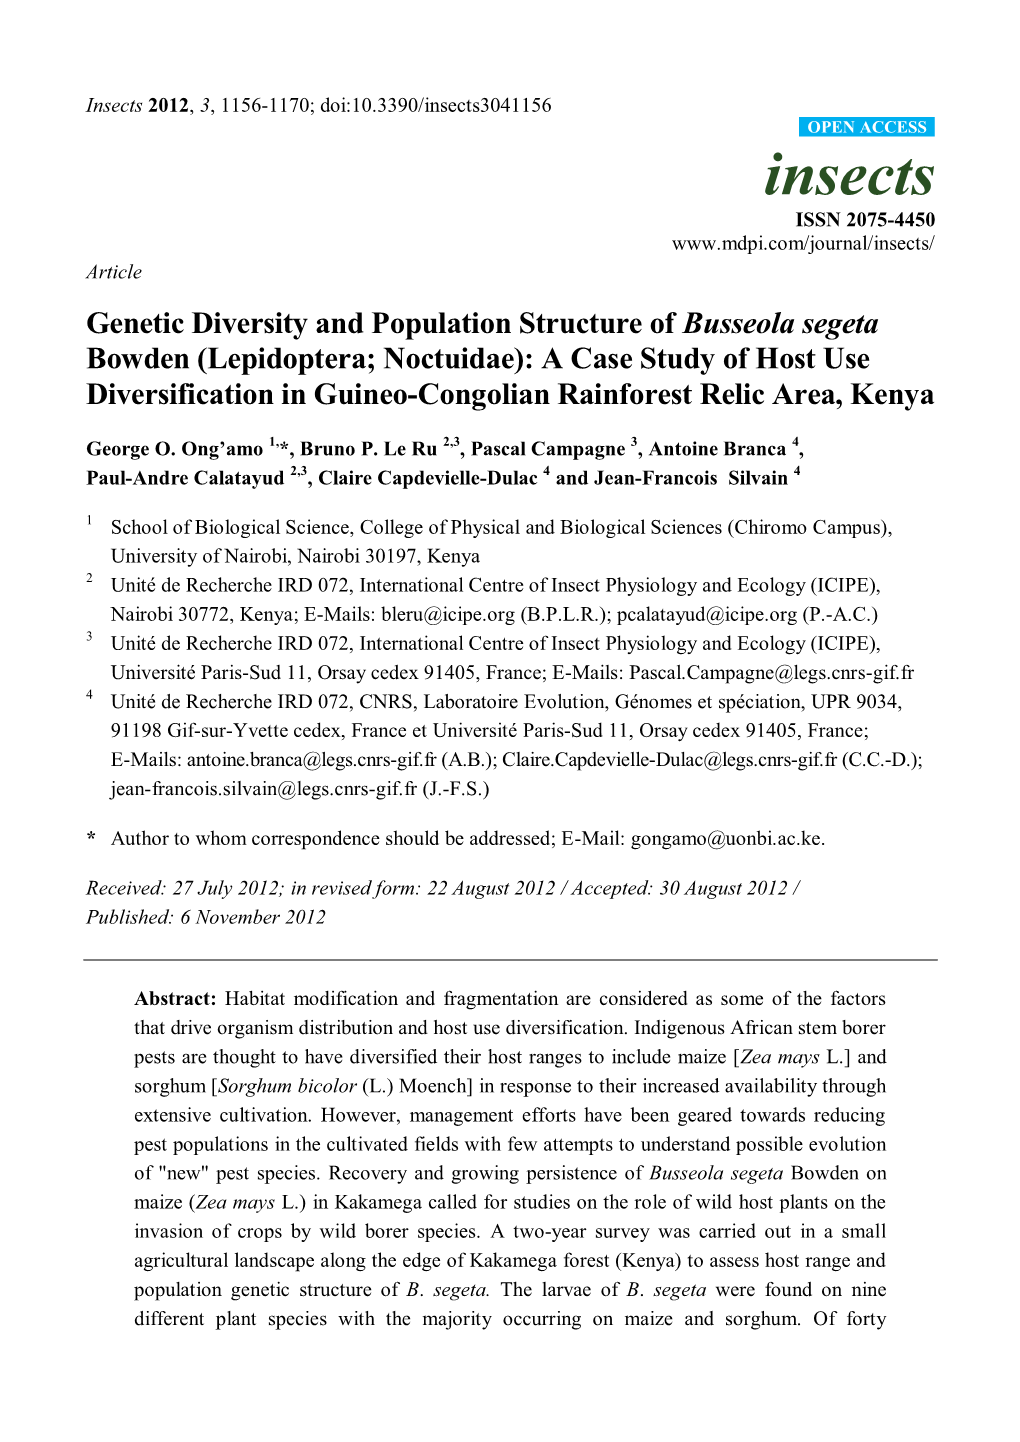 Genetic Diversity and Population Structure of Busseola Segeta Bowden (Lepidoptera; Noctuidae): a Case Study of Host Use Diversif